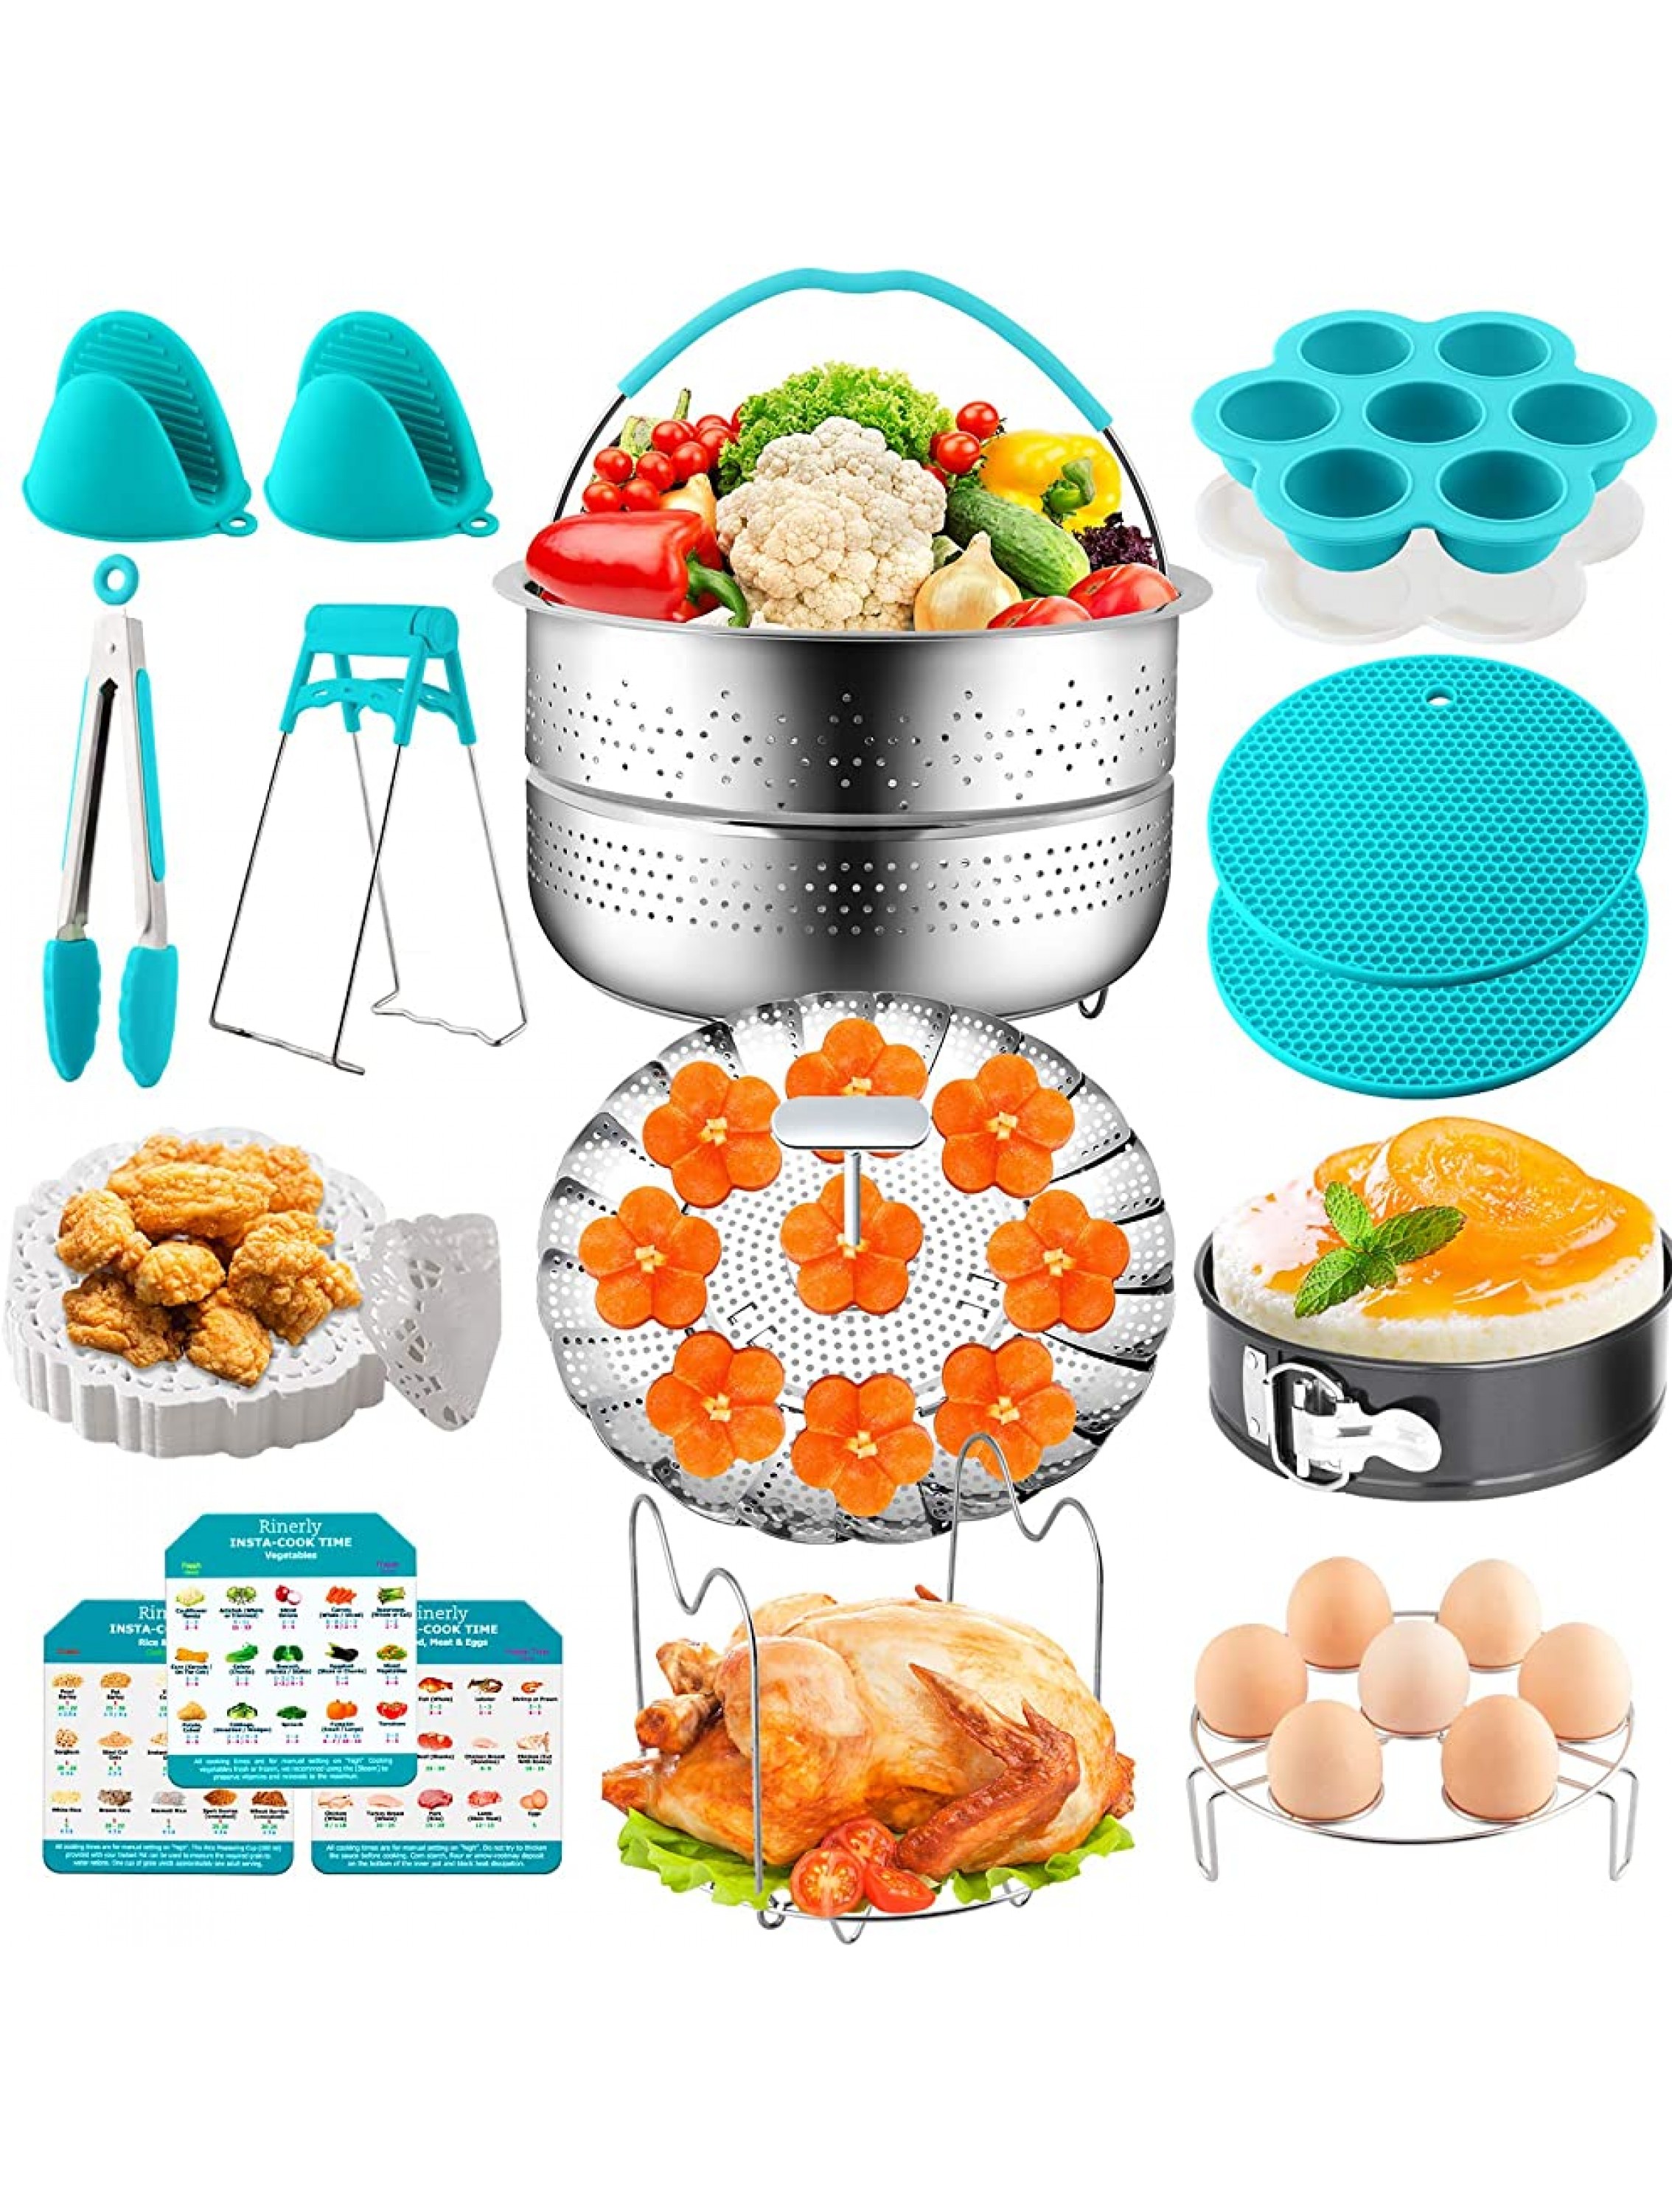 Rinerly Instant Pot Accessories,Compatible 6,8Qt Instant Pot Accessories Set-Steamers,Spring Pot,Vegetable Steamer Basket,Steamed Egg Rack,Egg Bite Mold,Kitchen Tong,Silicone Pad,Etc 90Pcs - B0D3ION1B